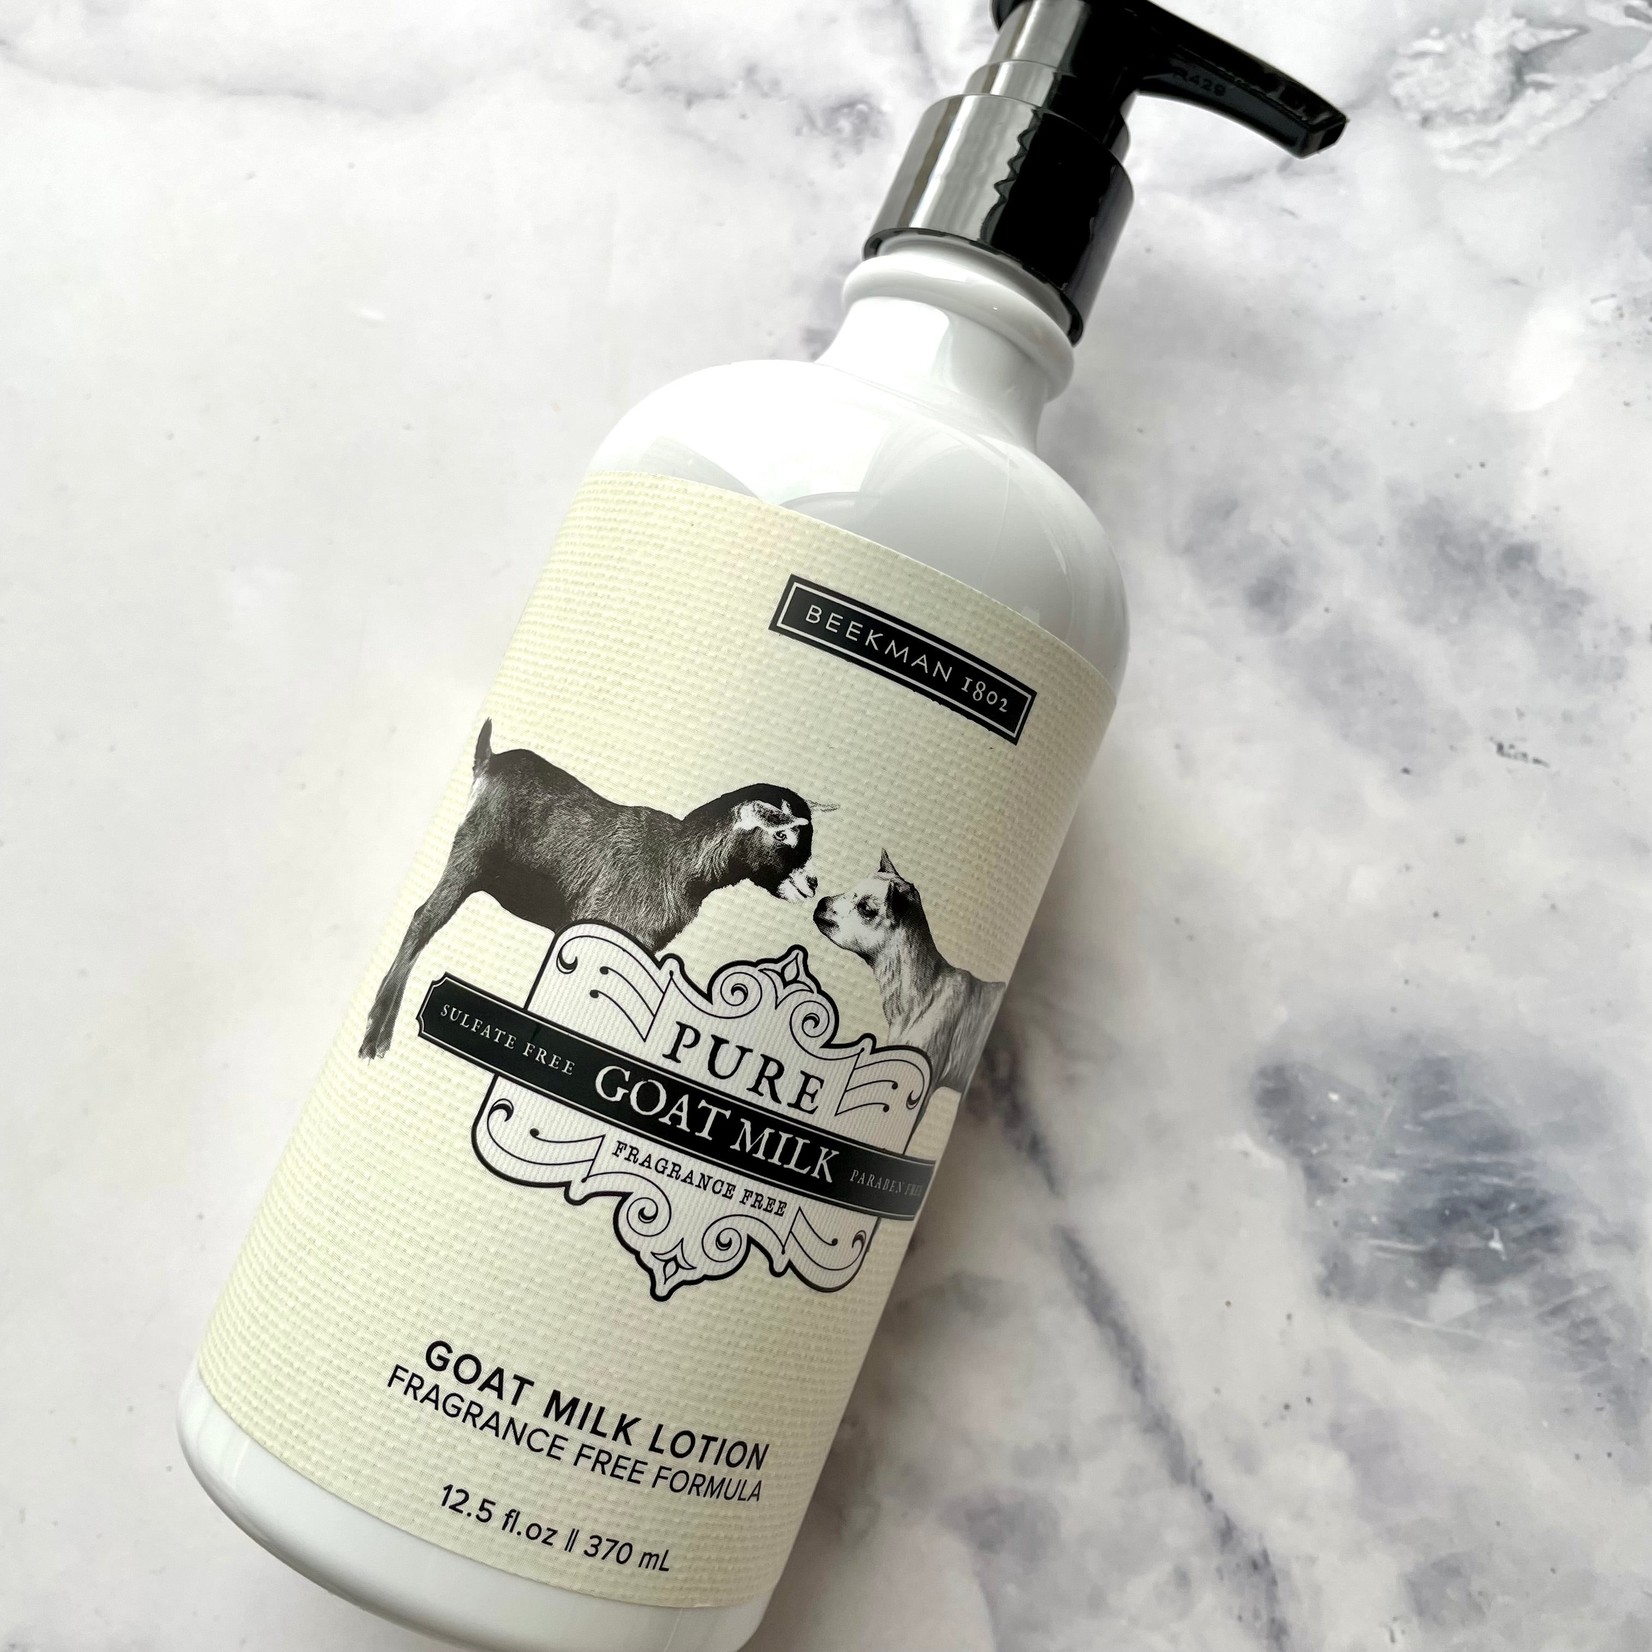 Pure Goat Milk Unscented Lotion